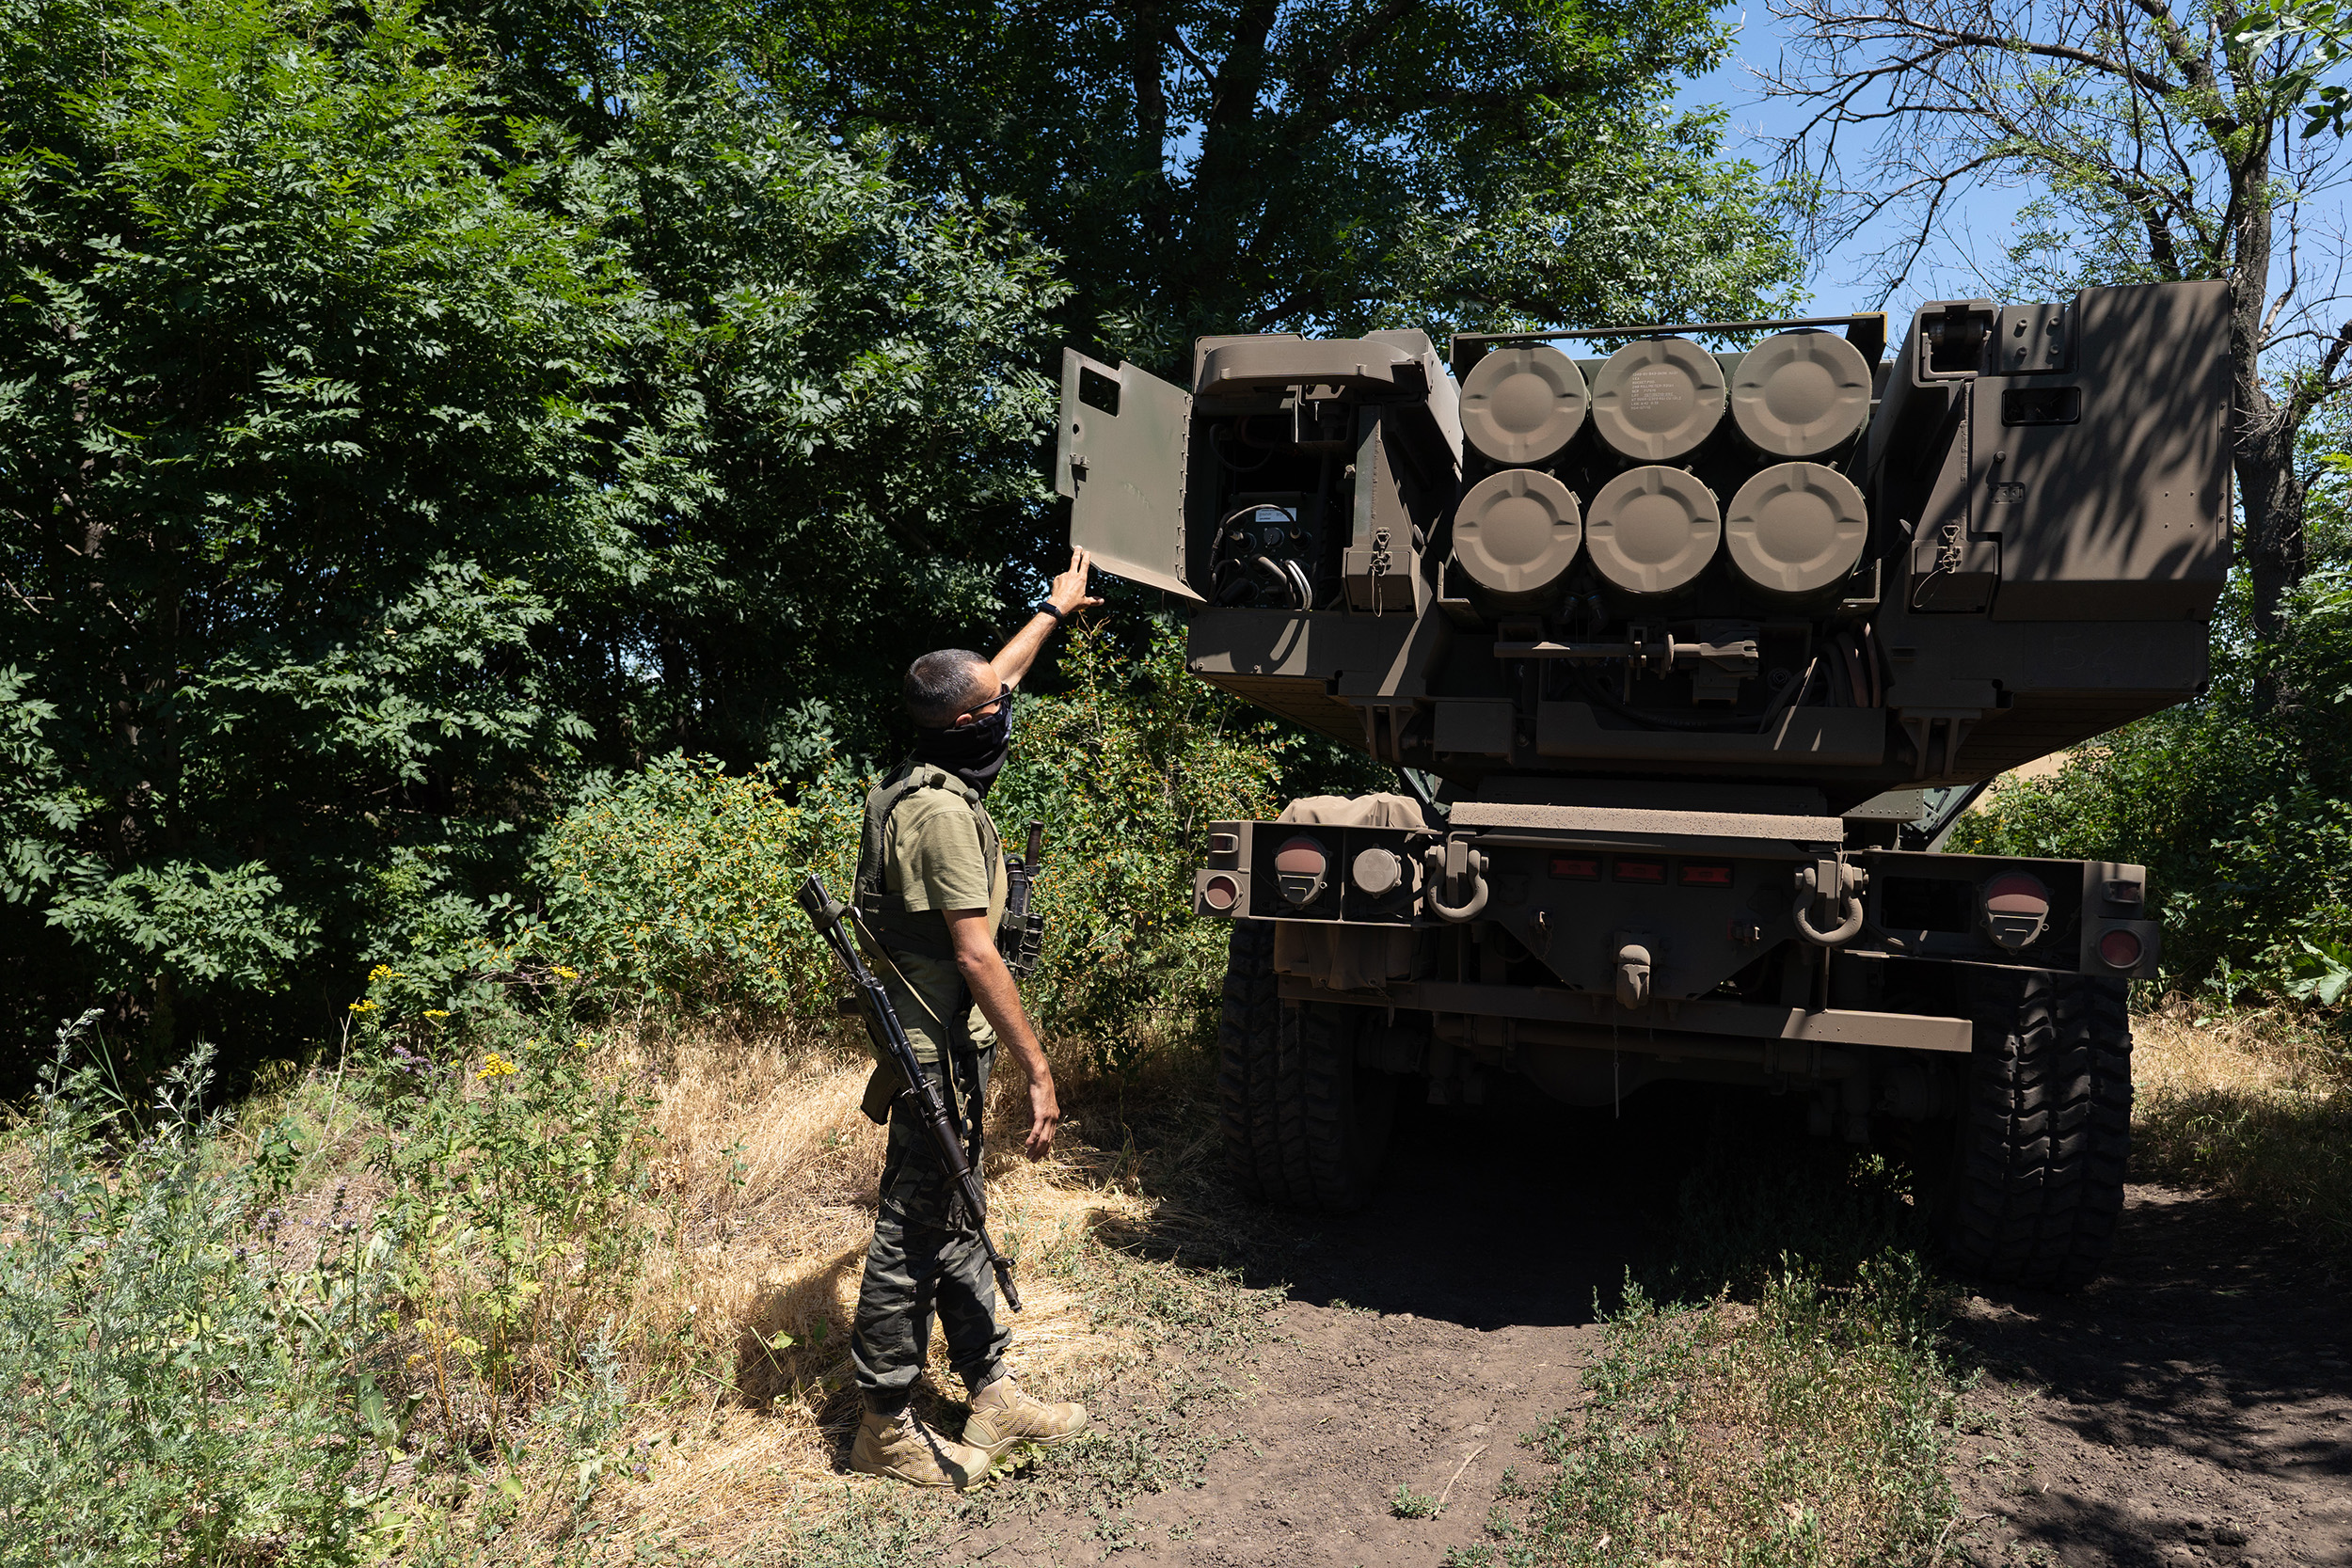 The commander of the unit shows the rockets on a HIMARS vehicle in eastern Ukraine on July 1.